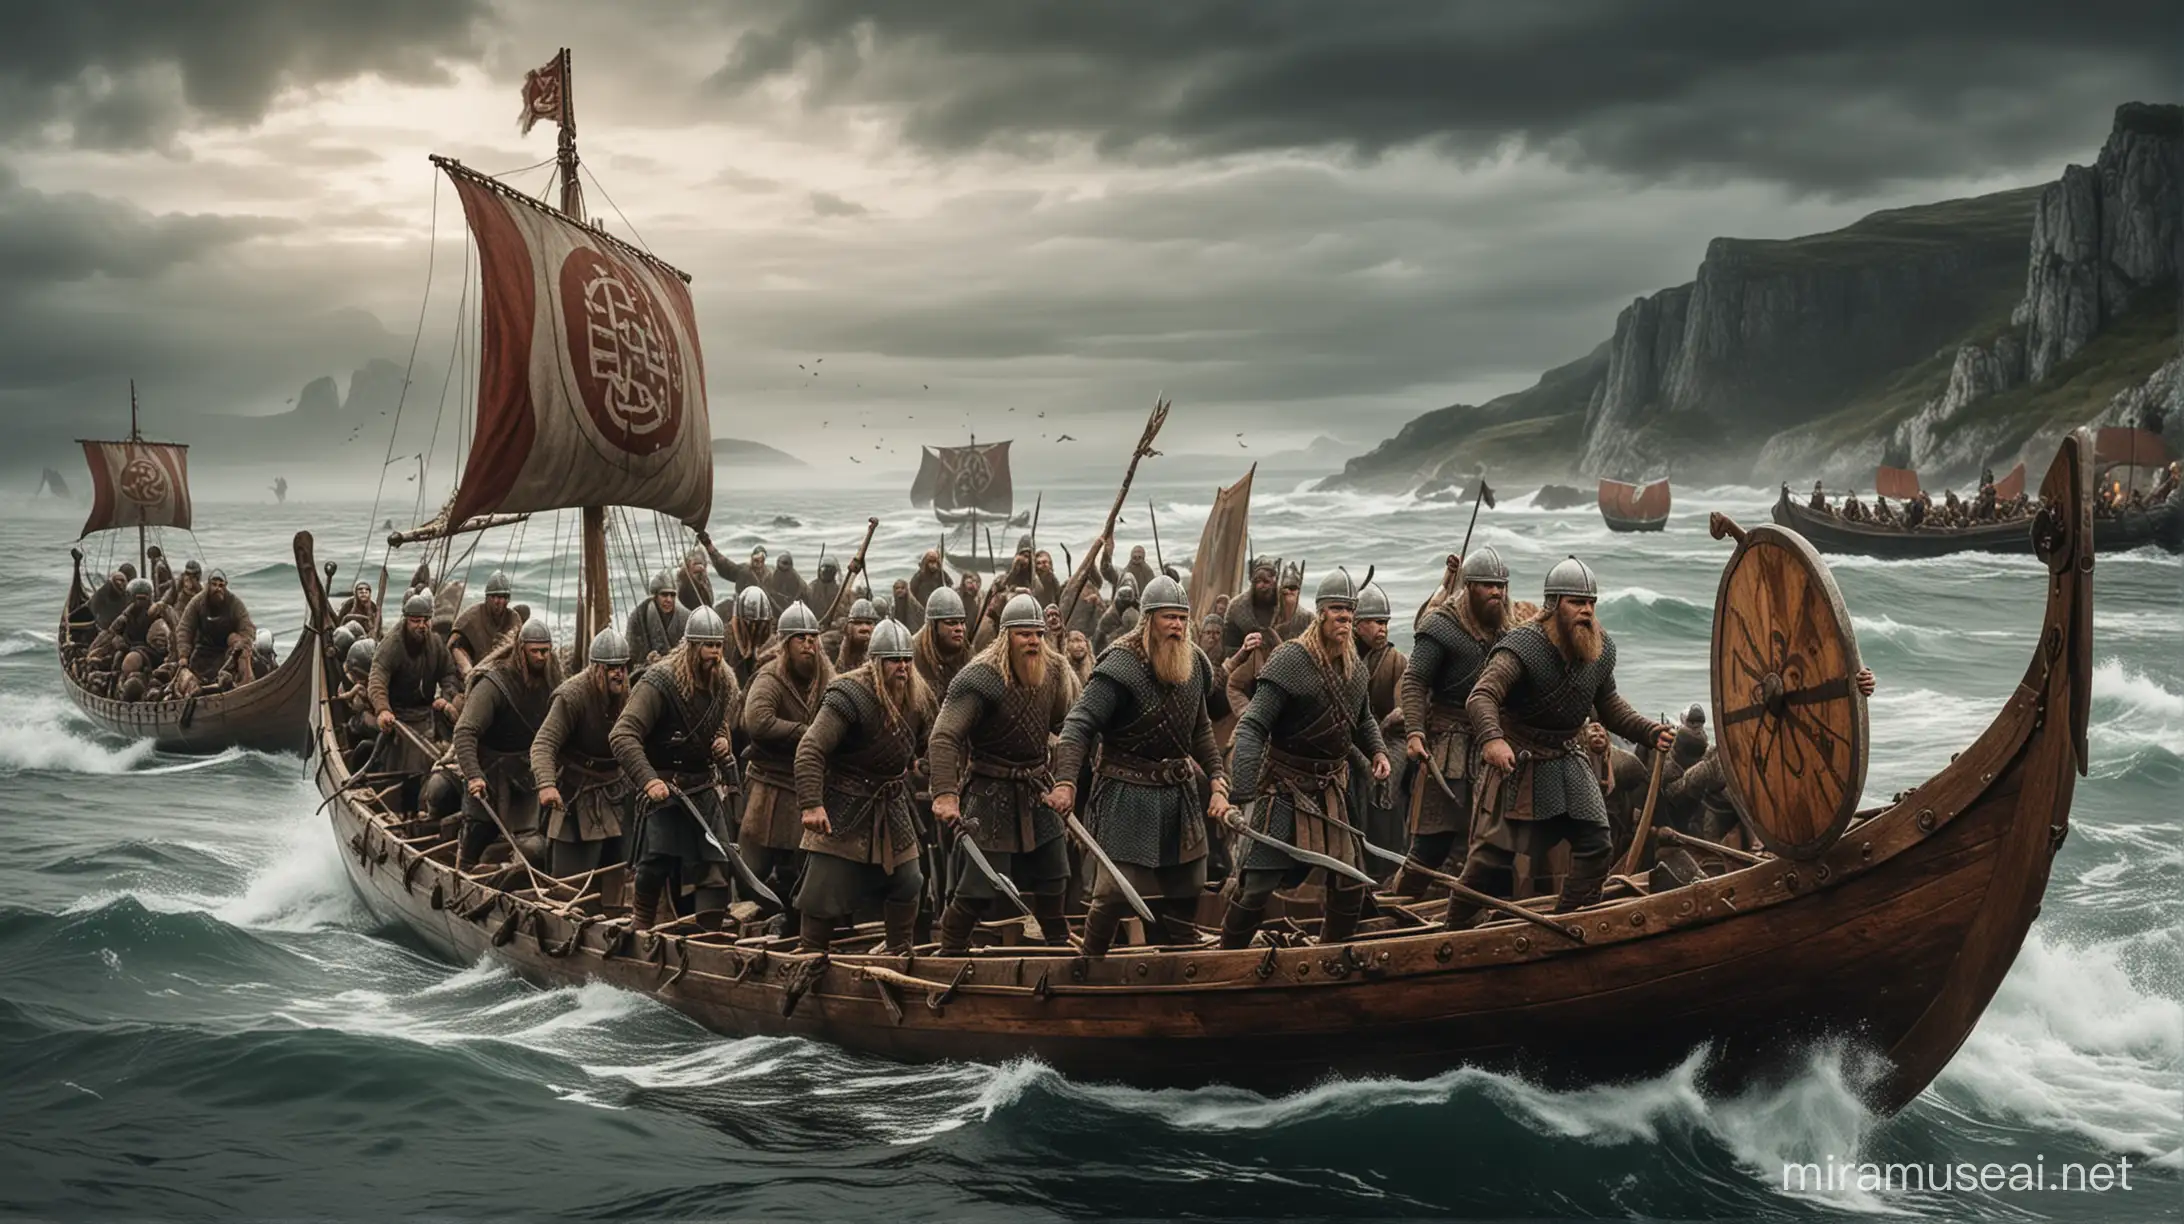 Epic Viking Warriors in Battle Amidst Seafaring Expeditions